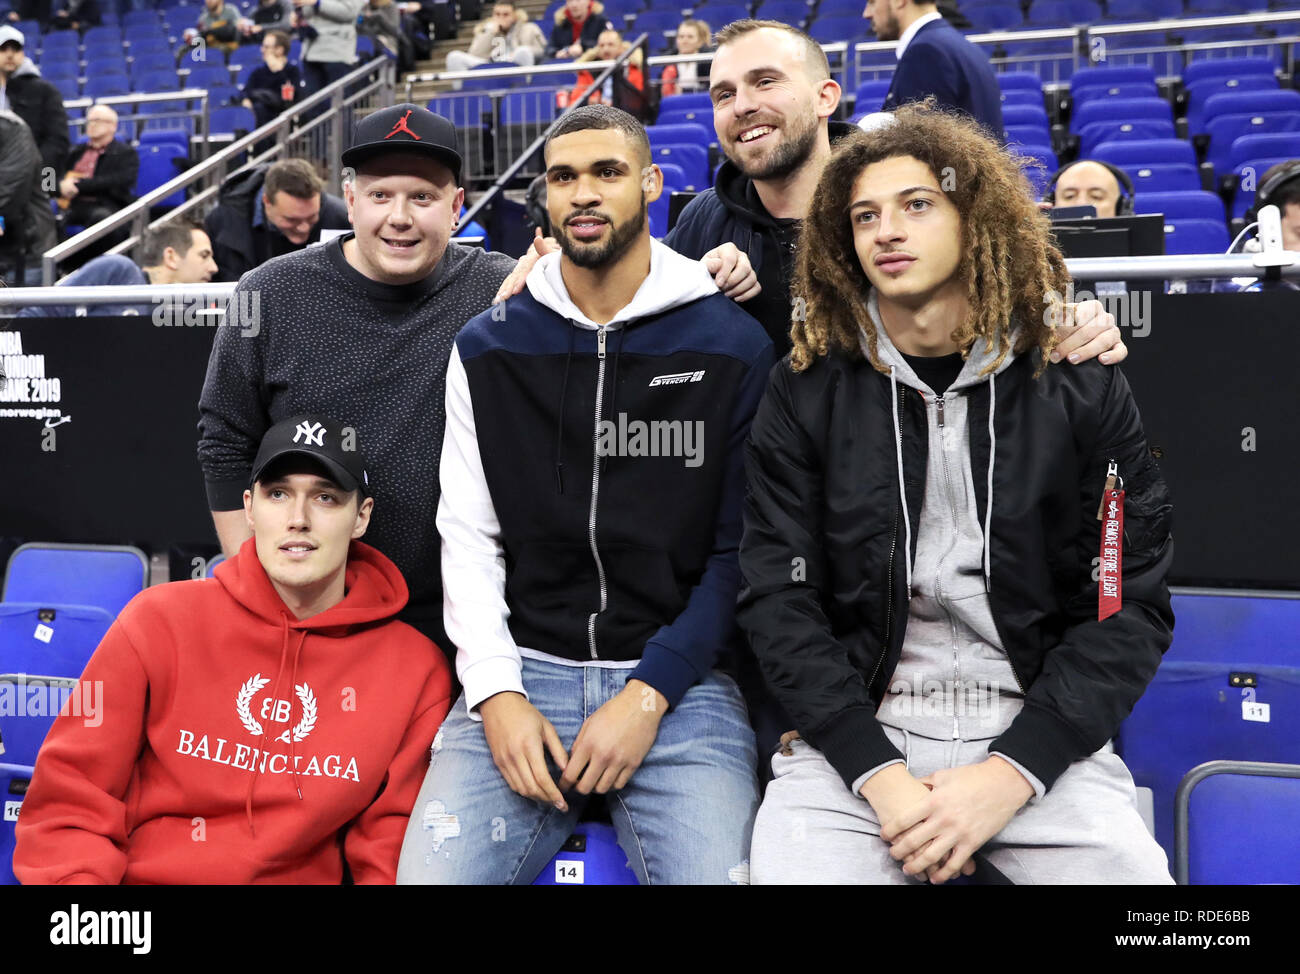 Ruben Loftus-Cheek (centre), Ethan Ampadu (right) and Andreas Christensen (bottom left) pose for a picture with fans during the NBA London Game 2019 at the O2 Arena, London. Stock Photo